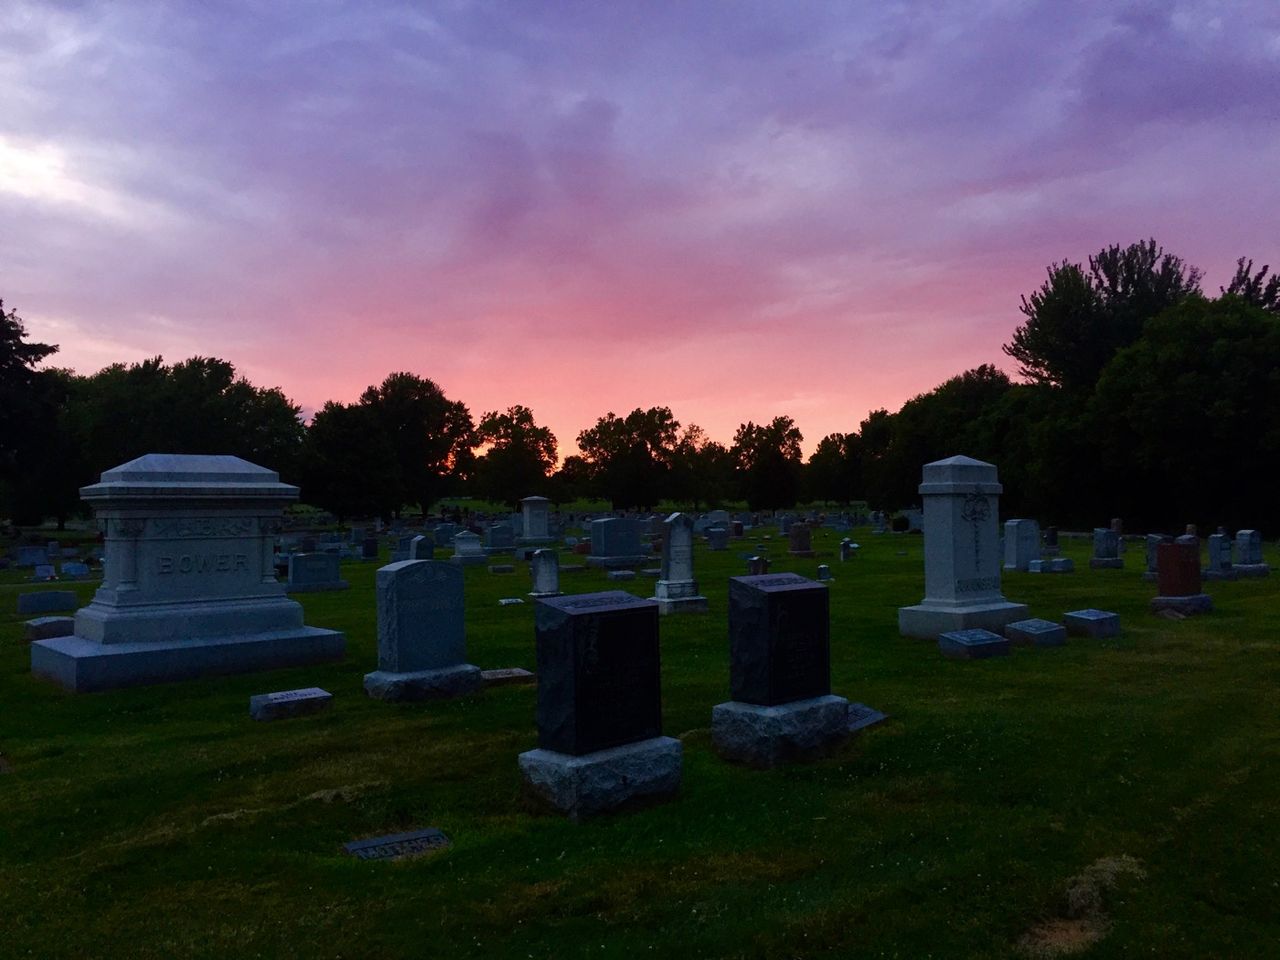 Pink and orange sky over a field of headstones.